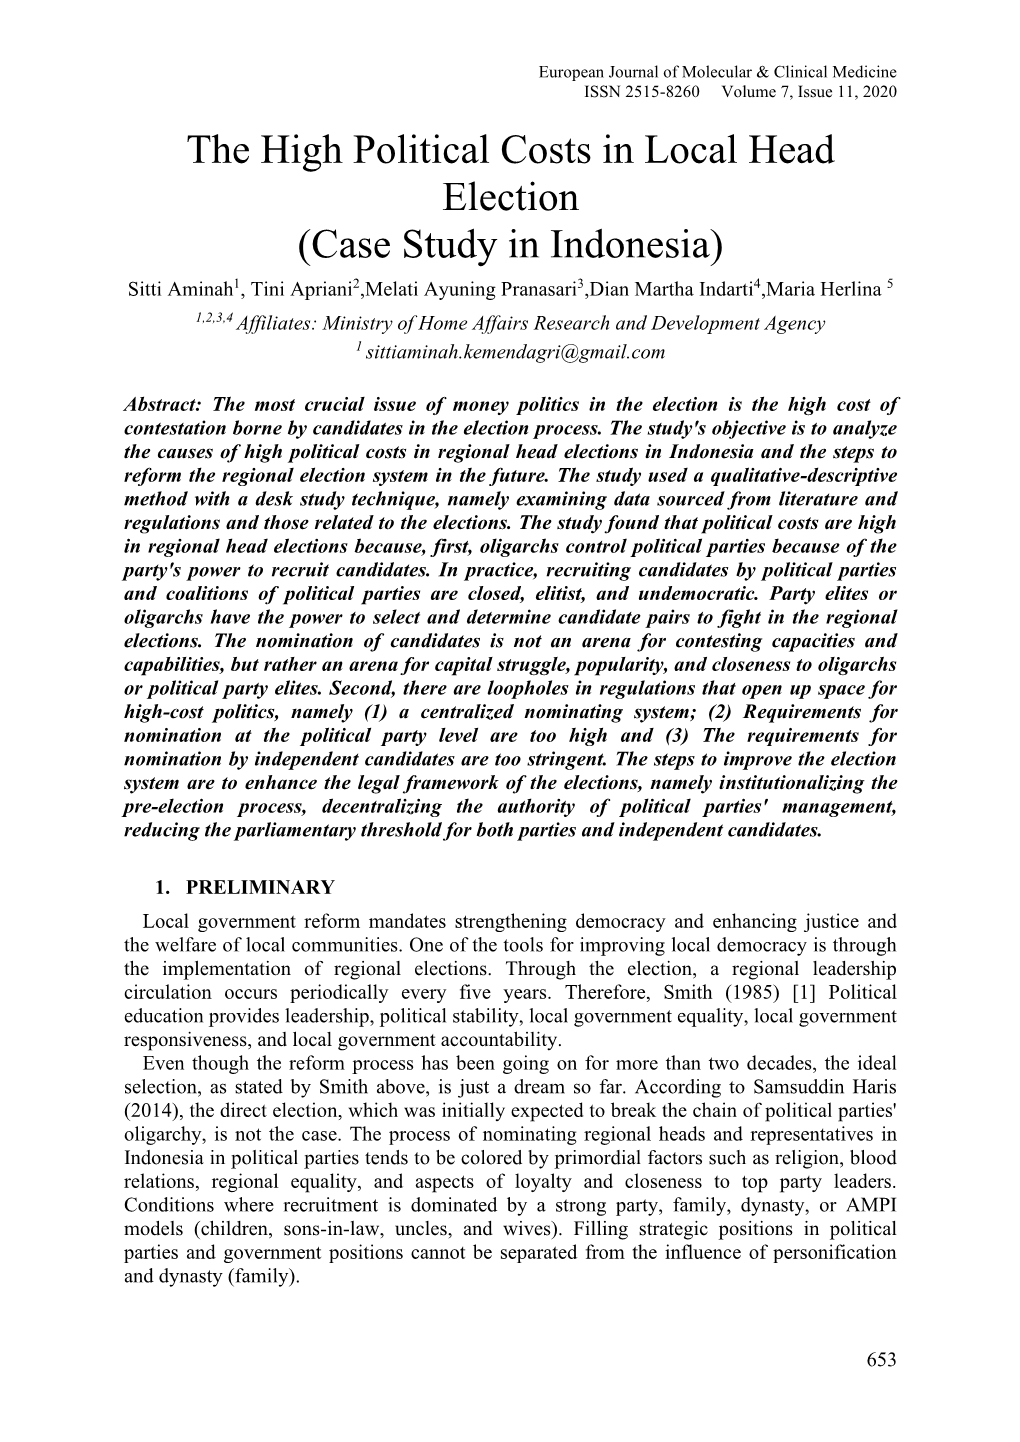 The High Political Costs in Local Head Election (Case Study in Indonesia)